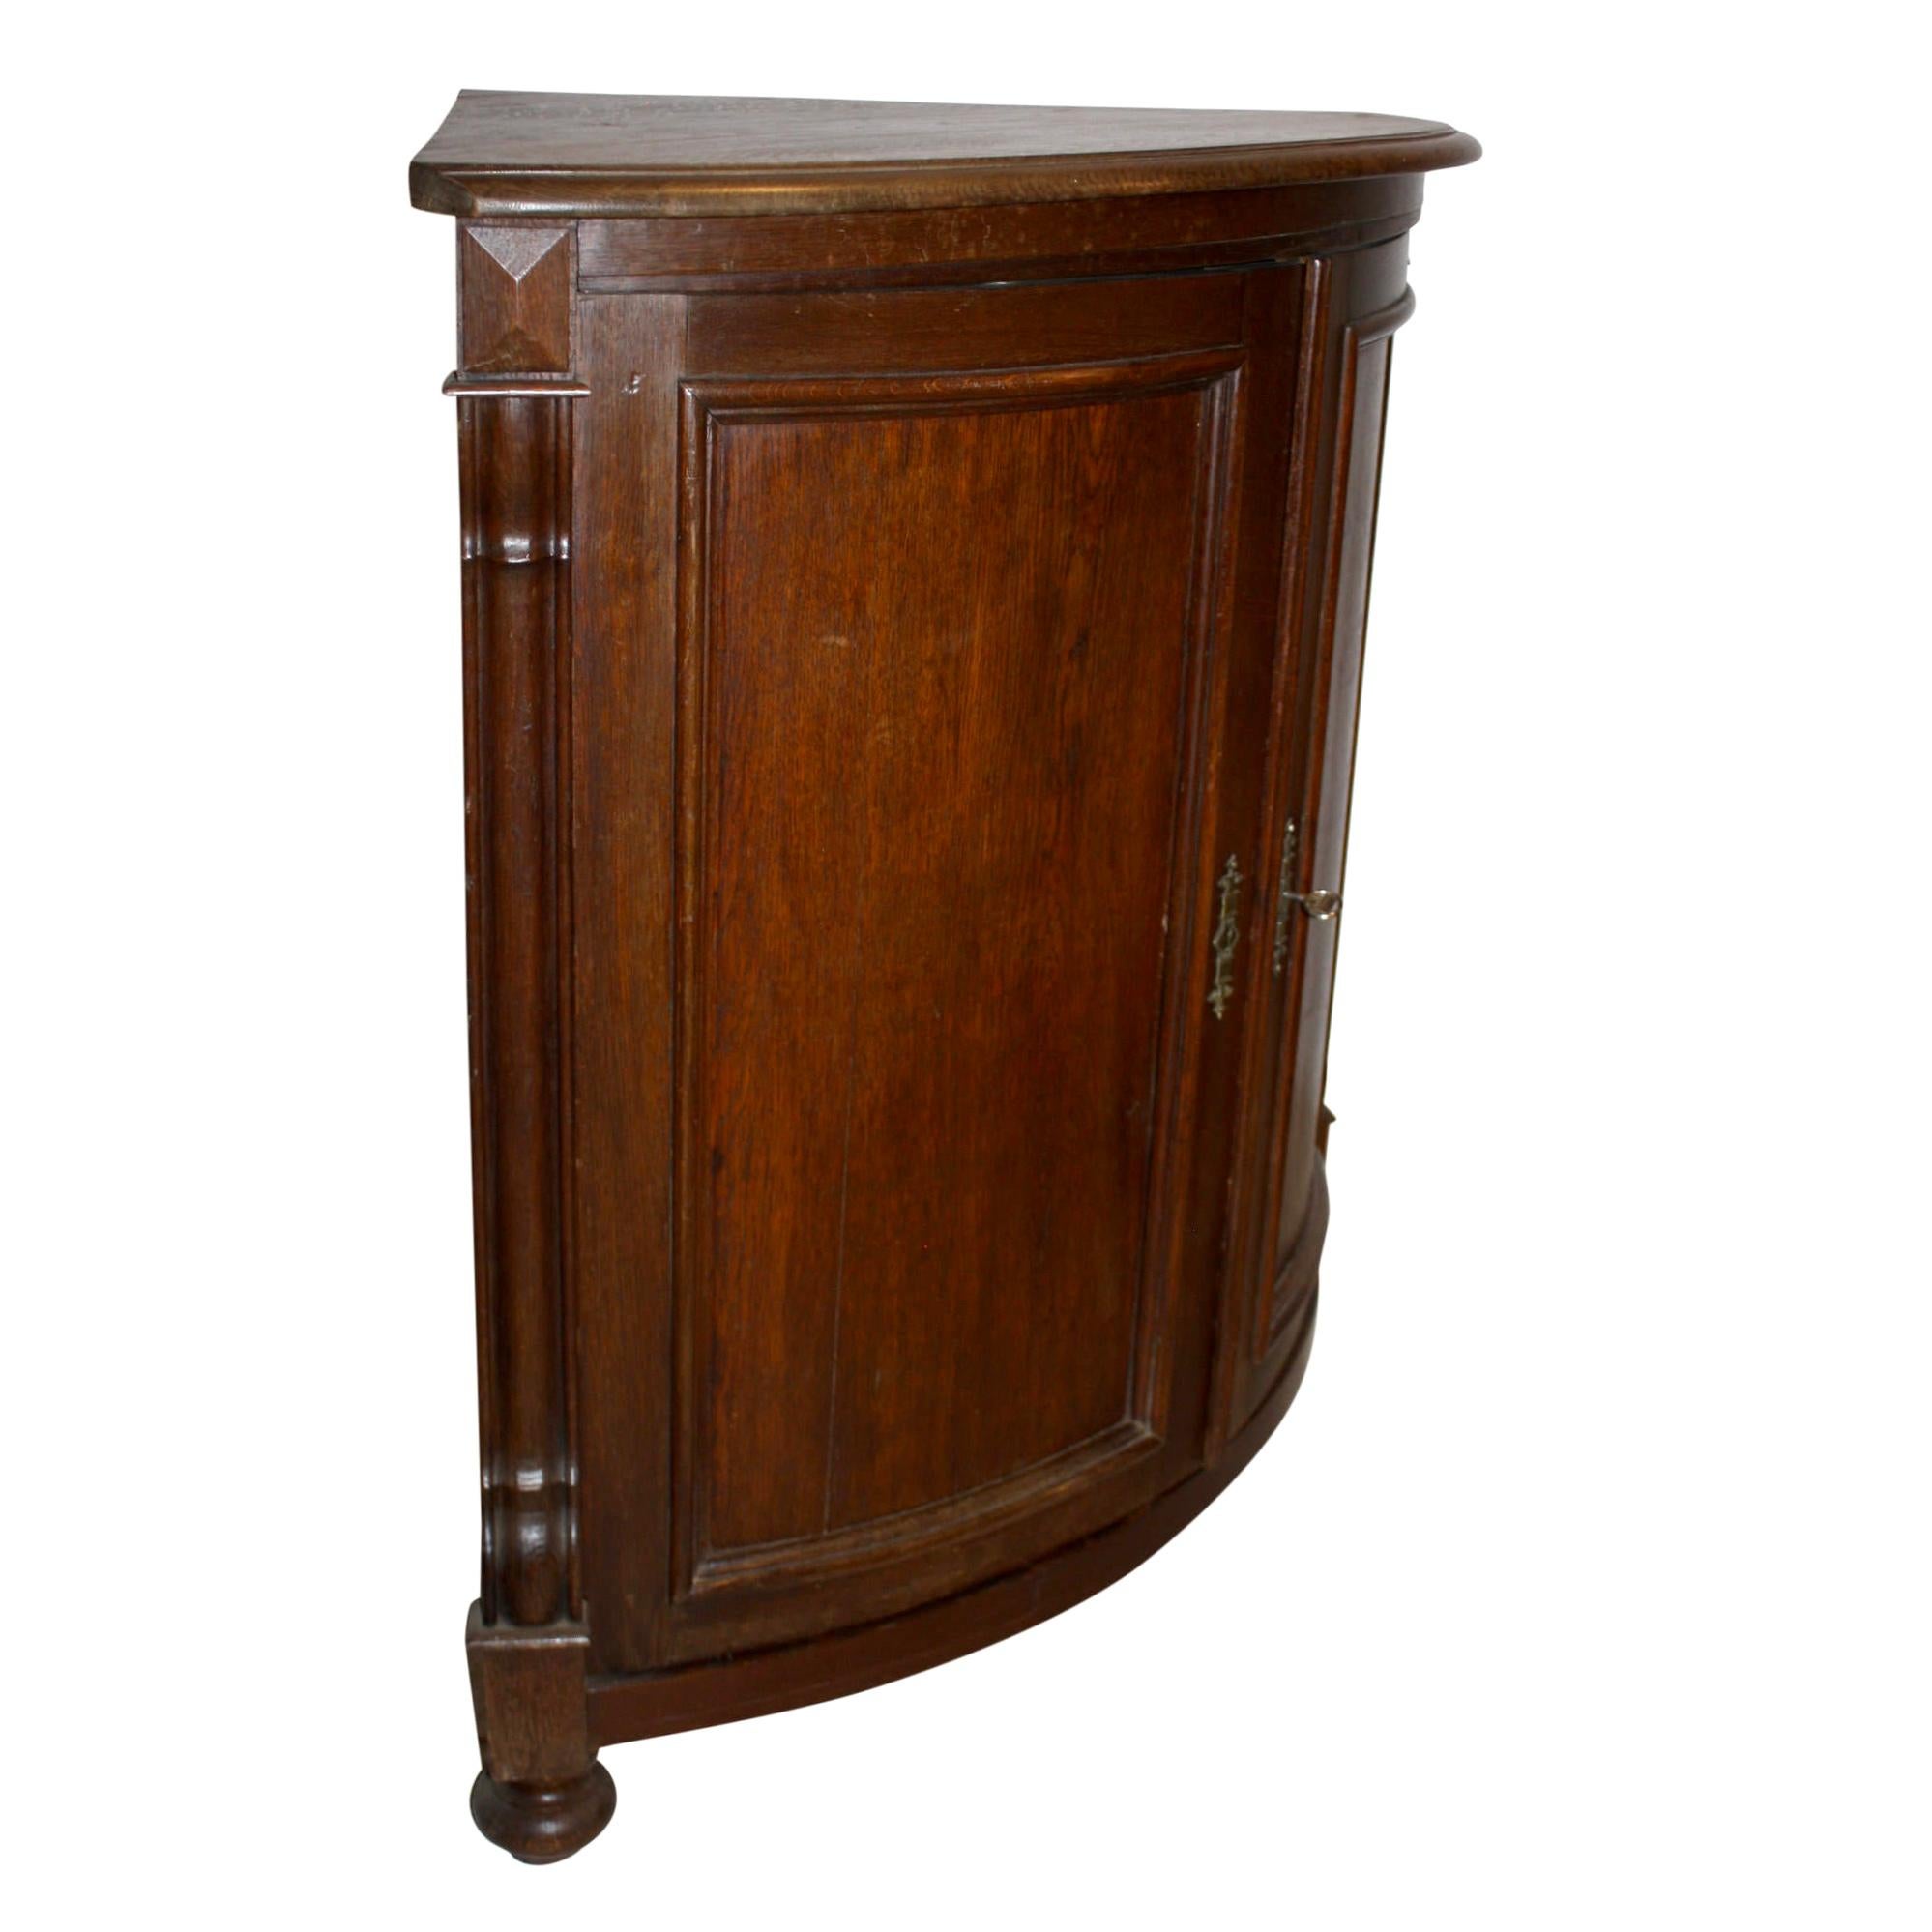 Featuring a bow front with double recessed panel doors and two fixed shelves, this corner cabinet has a wealth of storage. Brass escutcheons with a working Hauenschild key complement the rich patina of the oak. The cabinet rests on turned bun feet.